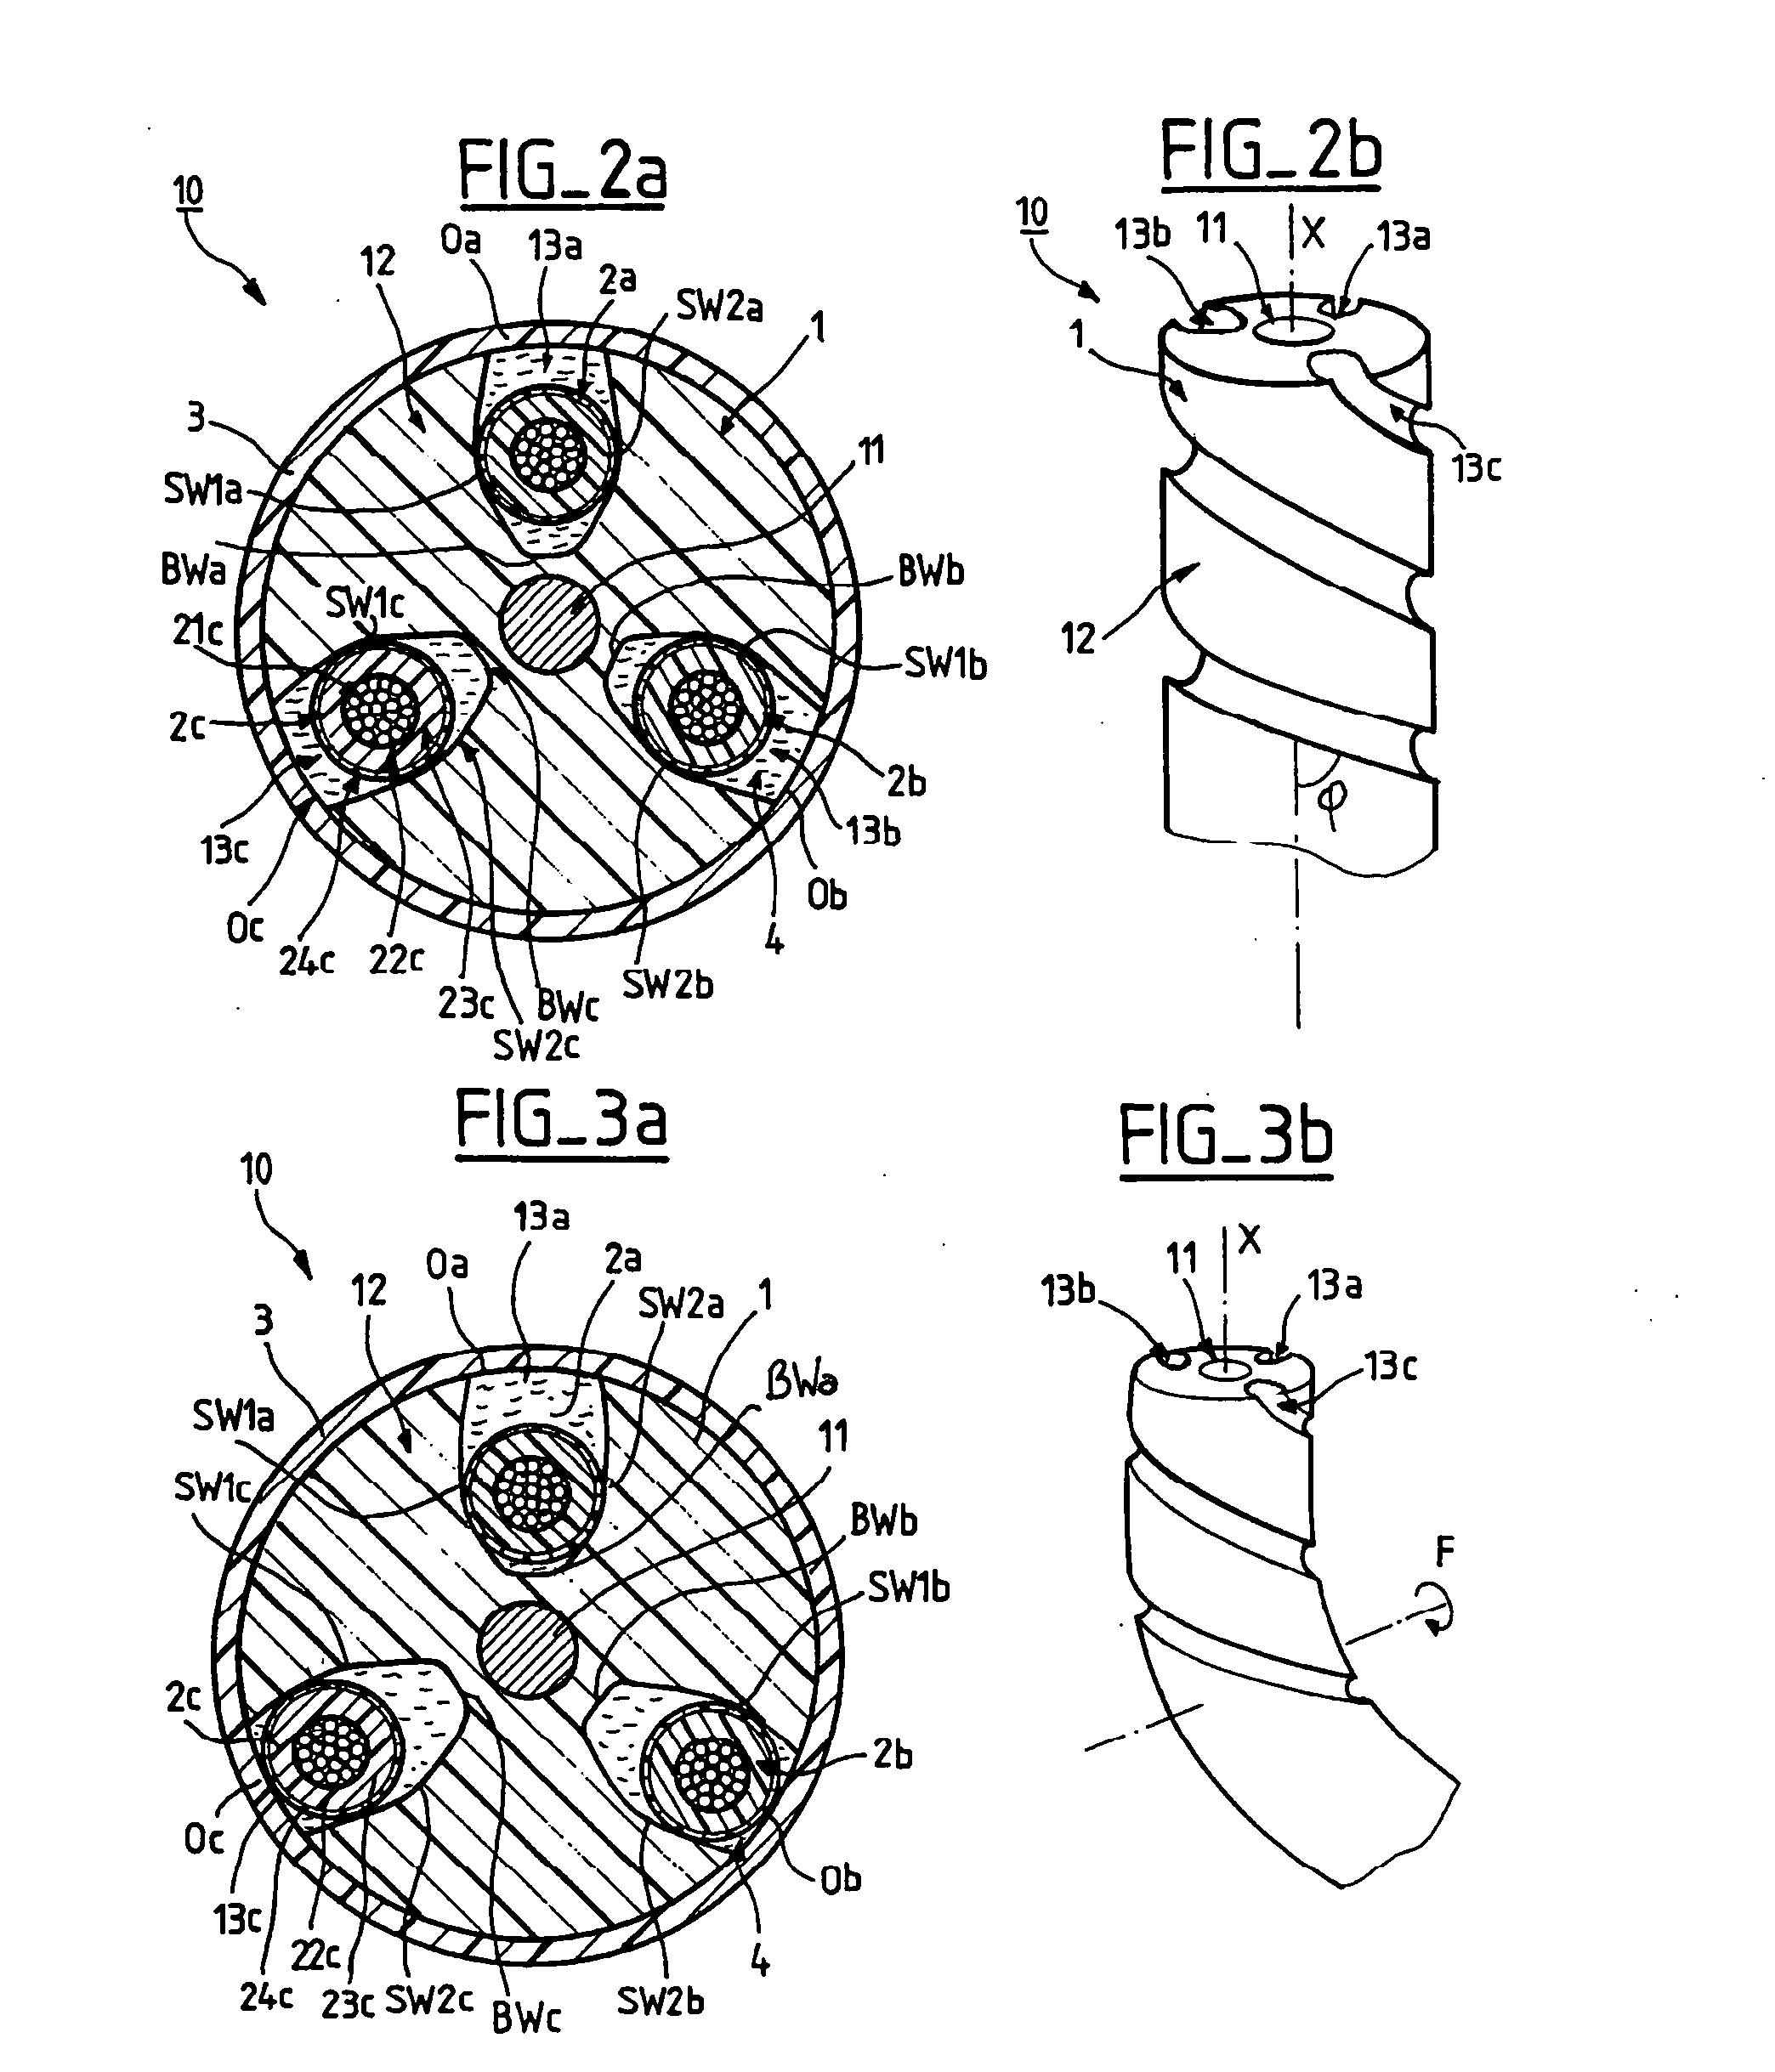 Flexible electrical elongated device suitable for service in a high mechanical load environment